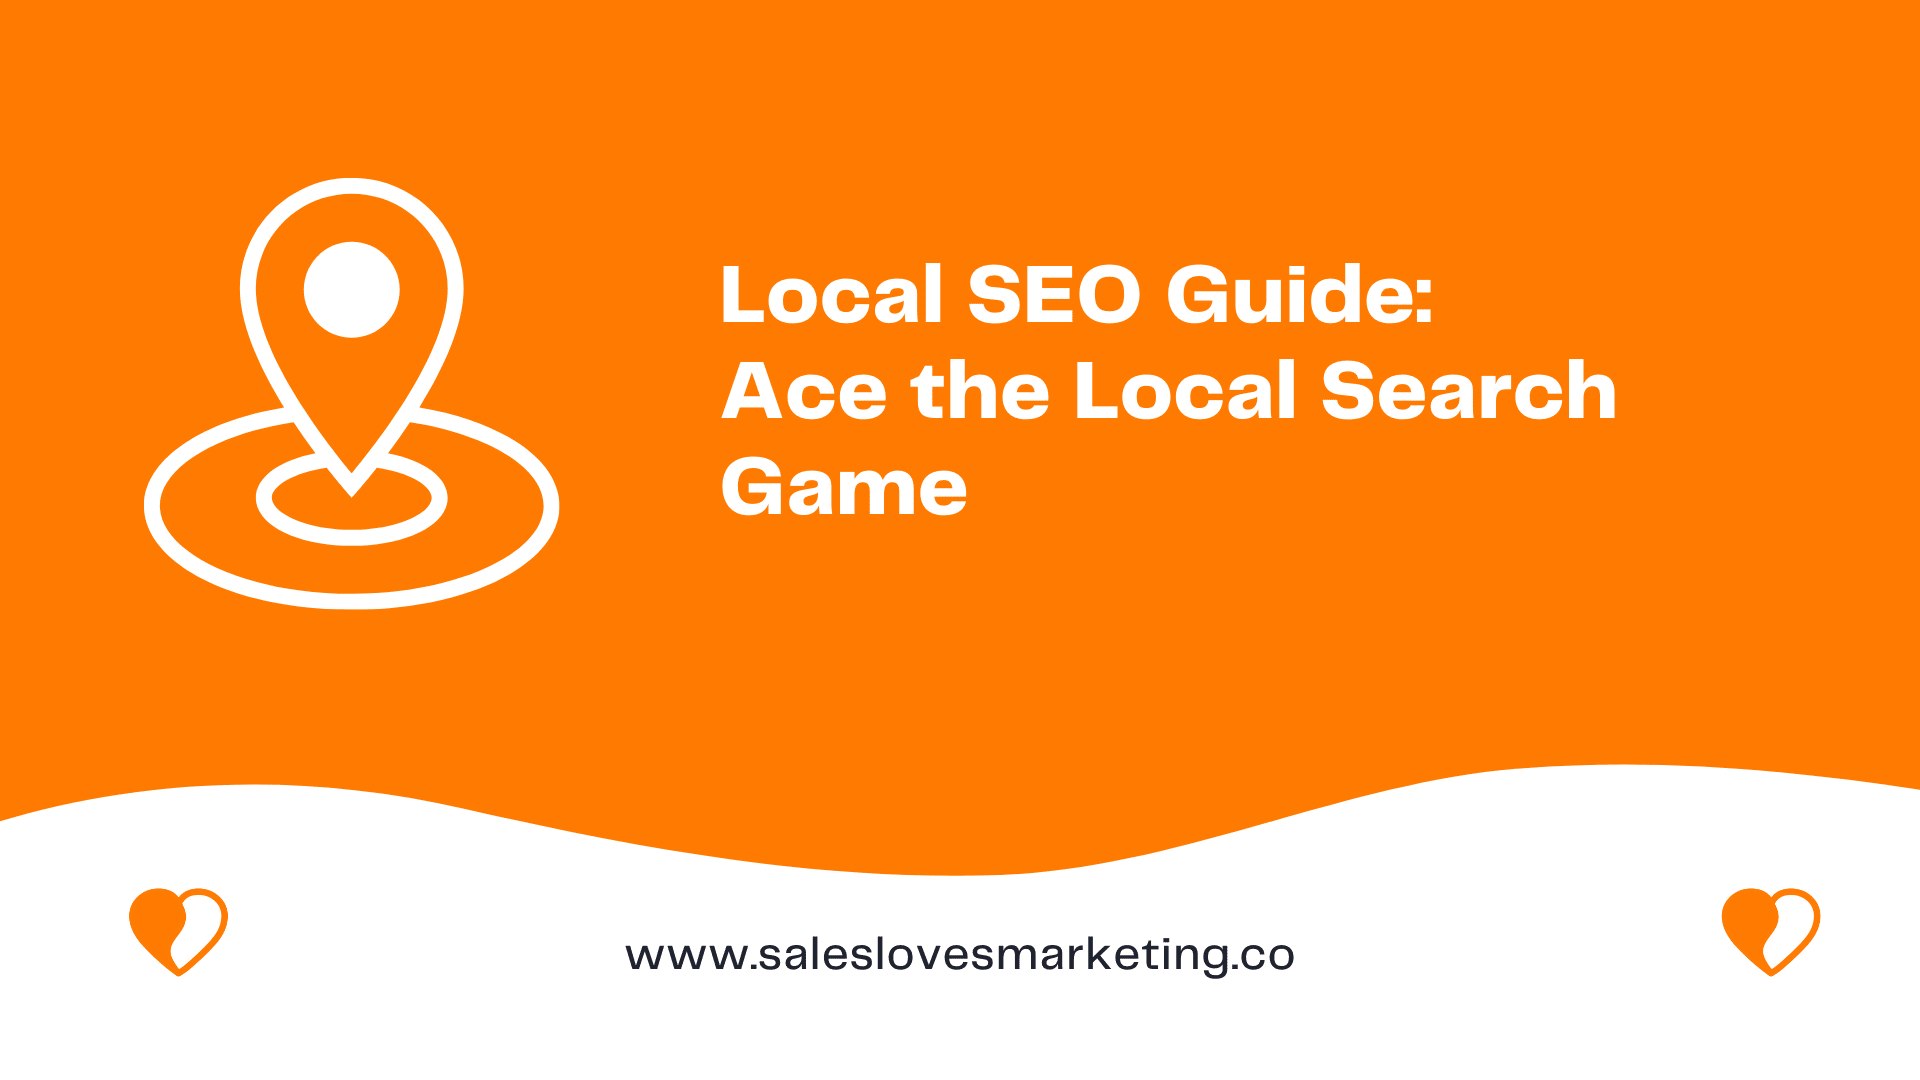 The Only Local SEO Guide You Need to Ace the Local Search Game